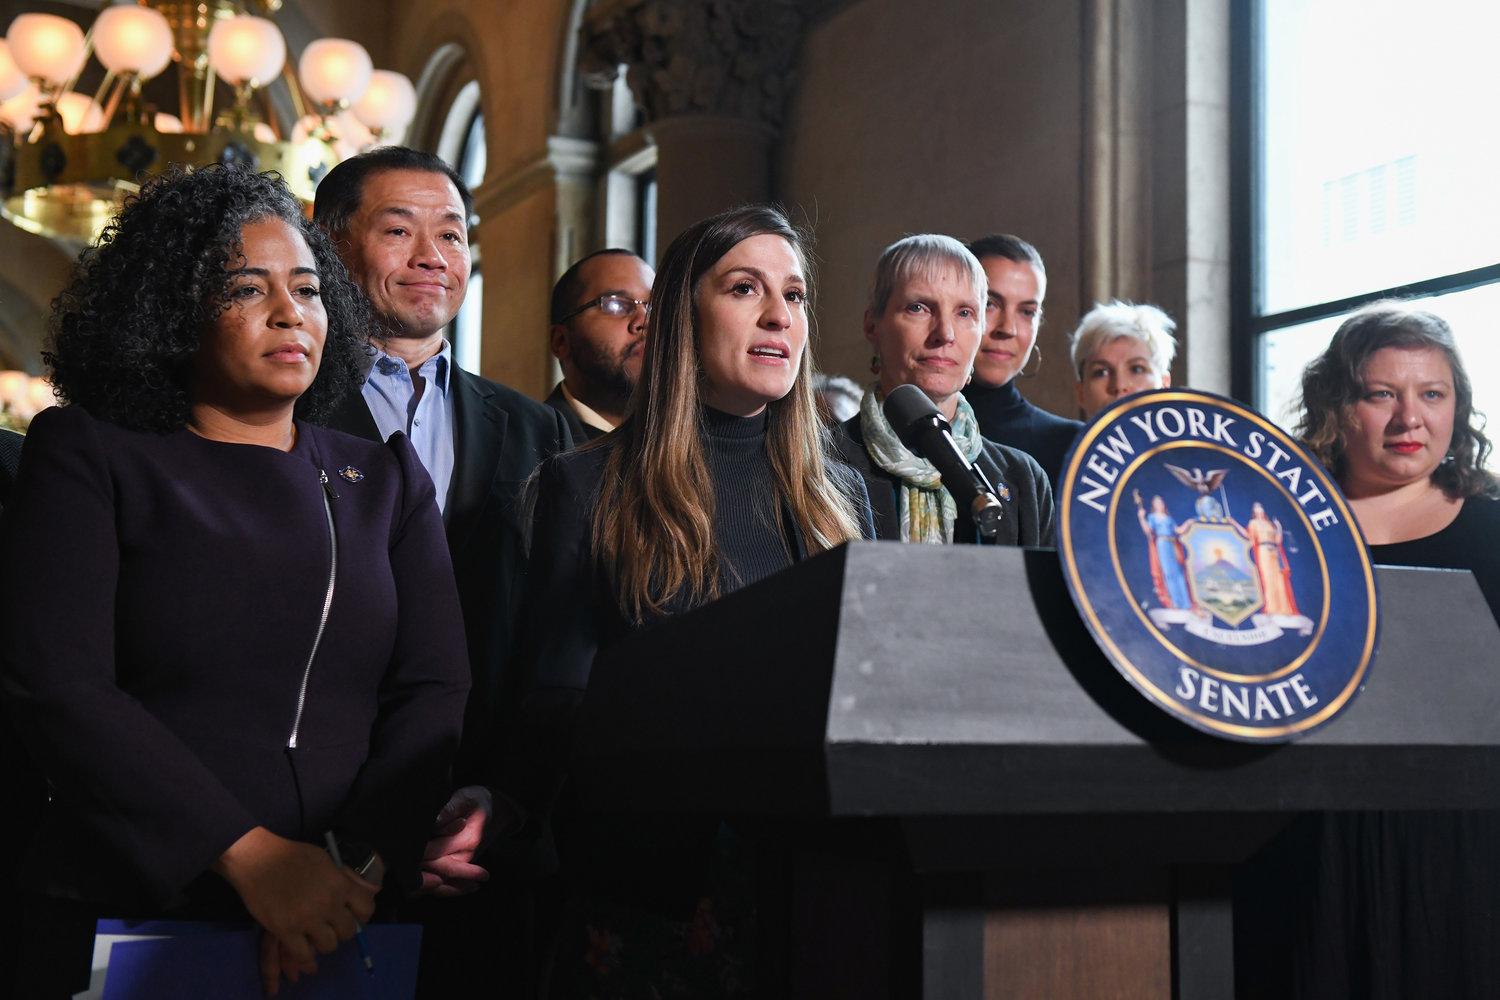 The Marijuana Regulation and Taxation Act, which provides broad legalization of marijuana, was ushered into law by state Sen. Alessandra Biaggi and a majority of her colleagues late last month. According to Biaggi, the bill aims to repair damage from the so-called ‘war on drugs’ by reinvesting in low-income communities of color.